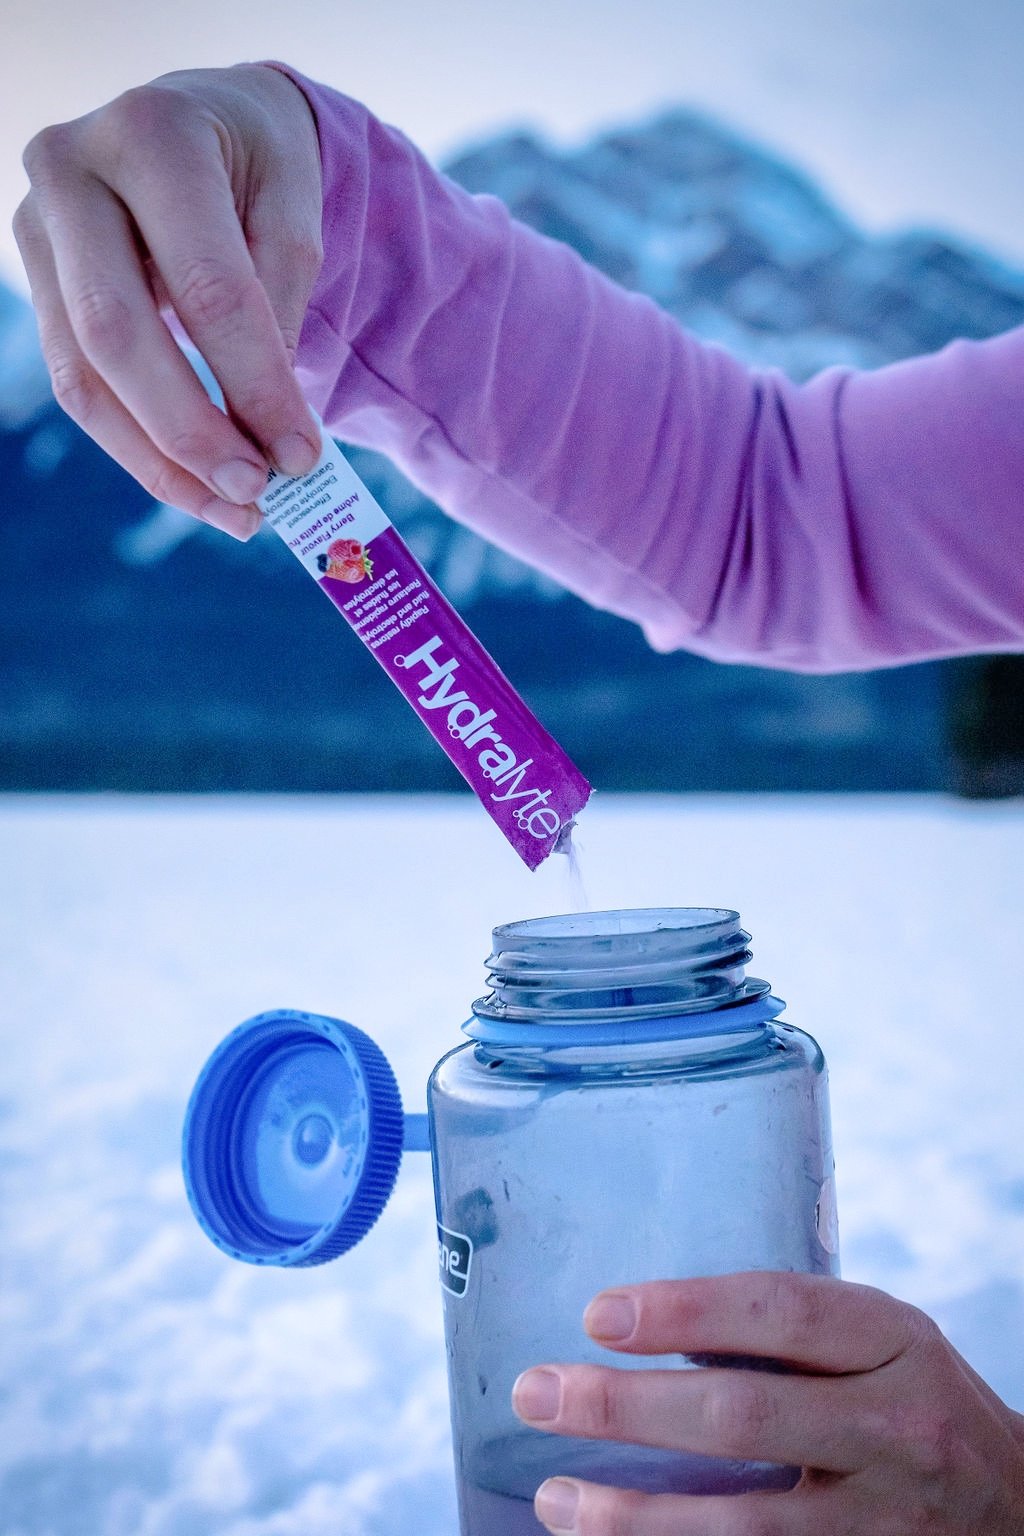 Staying hydrated in the winter and treating dehydration with Hydralyte